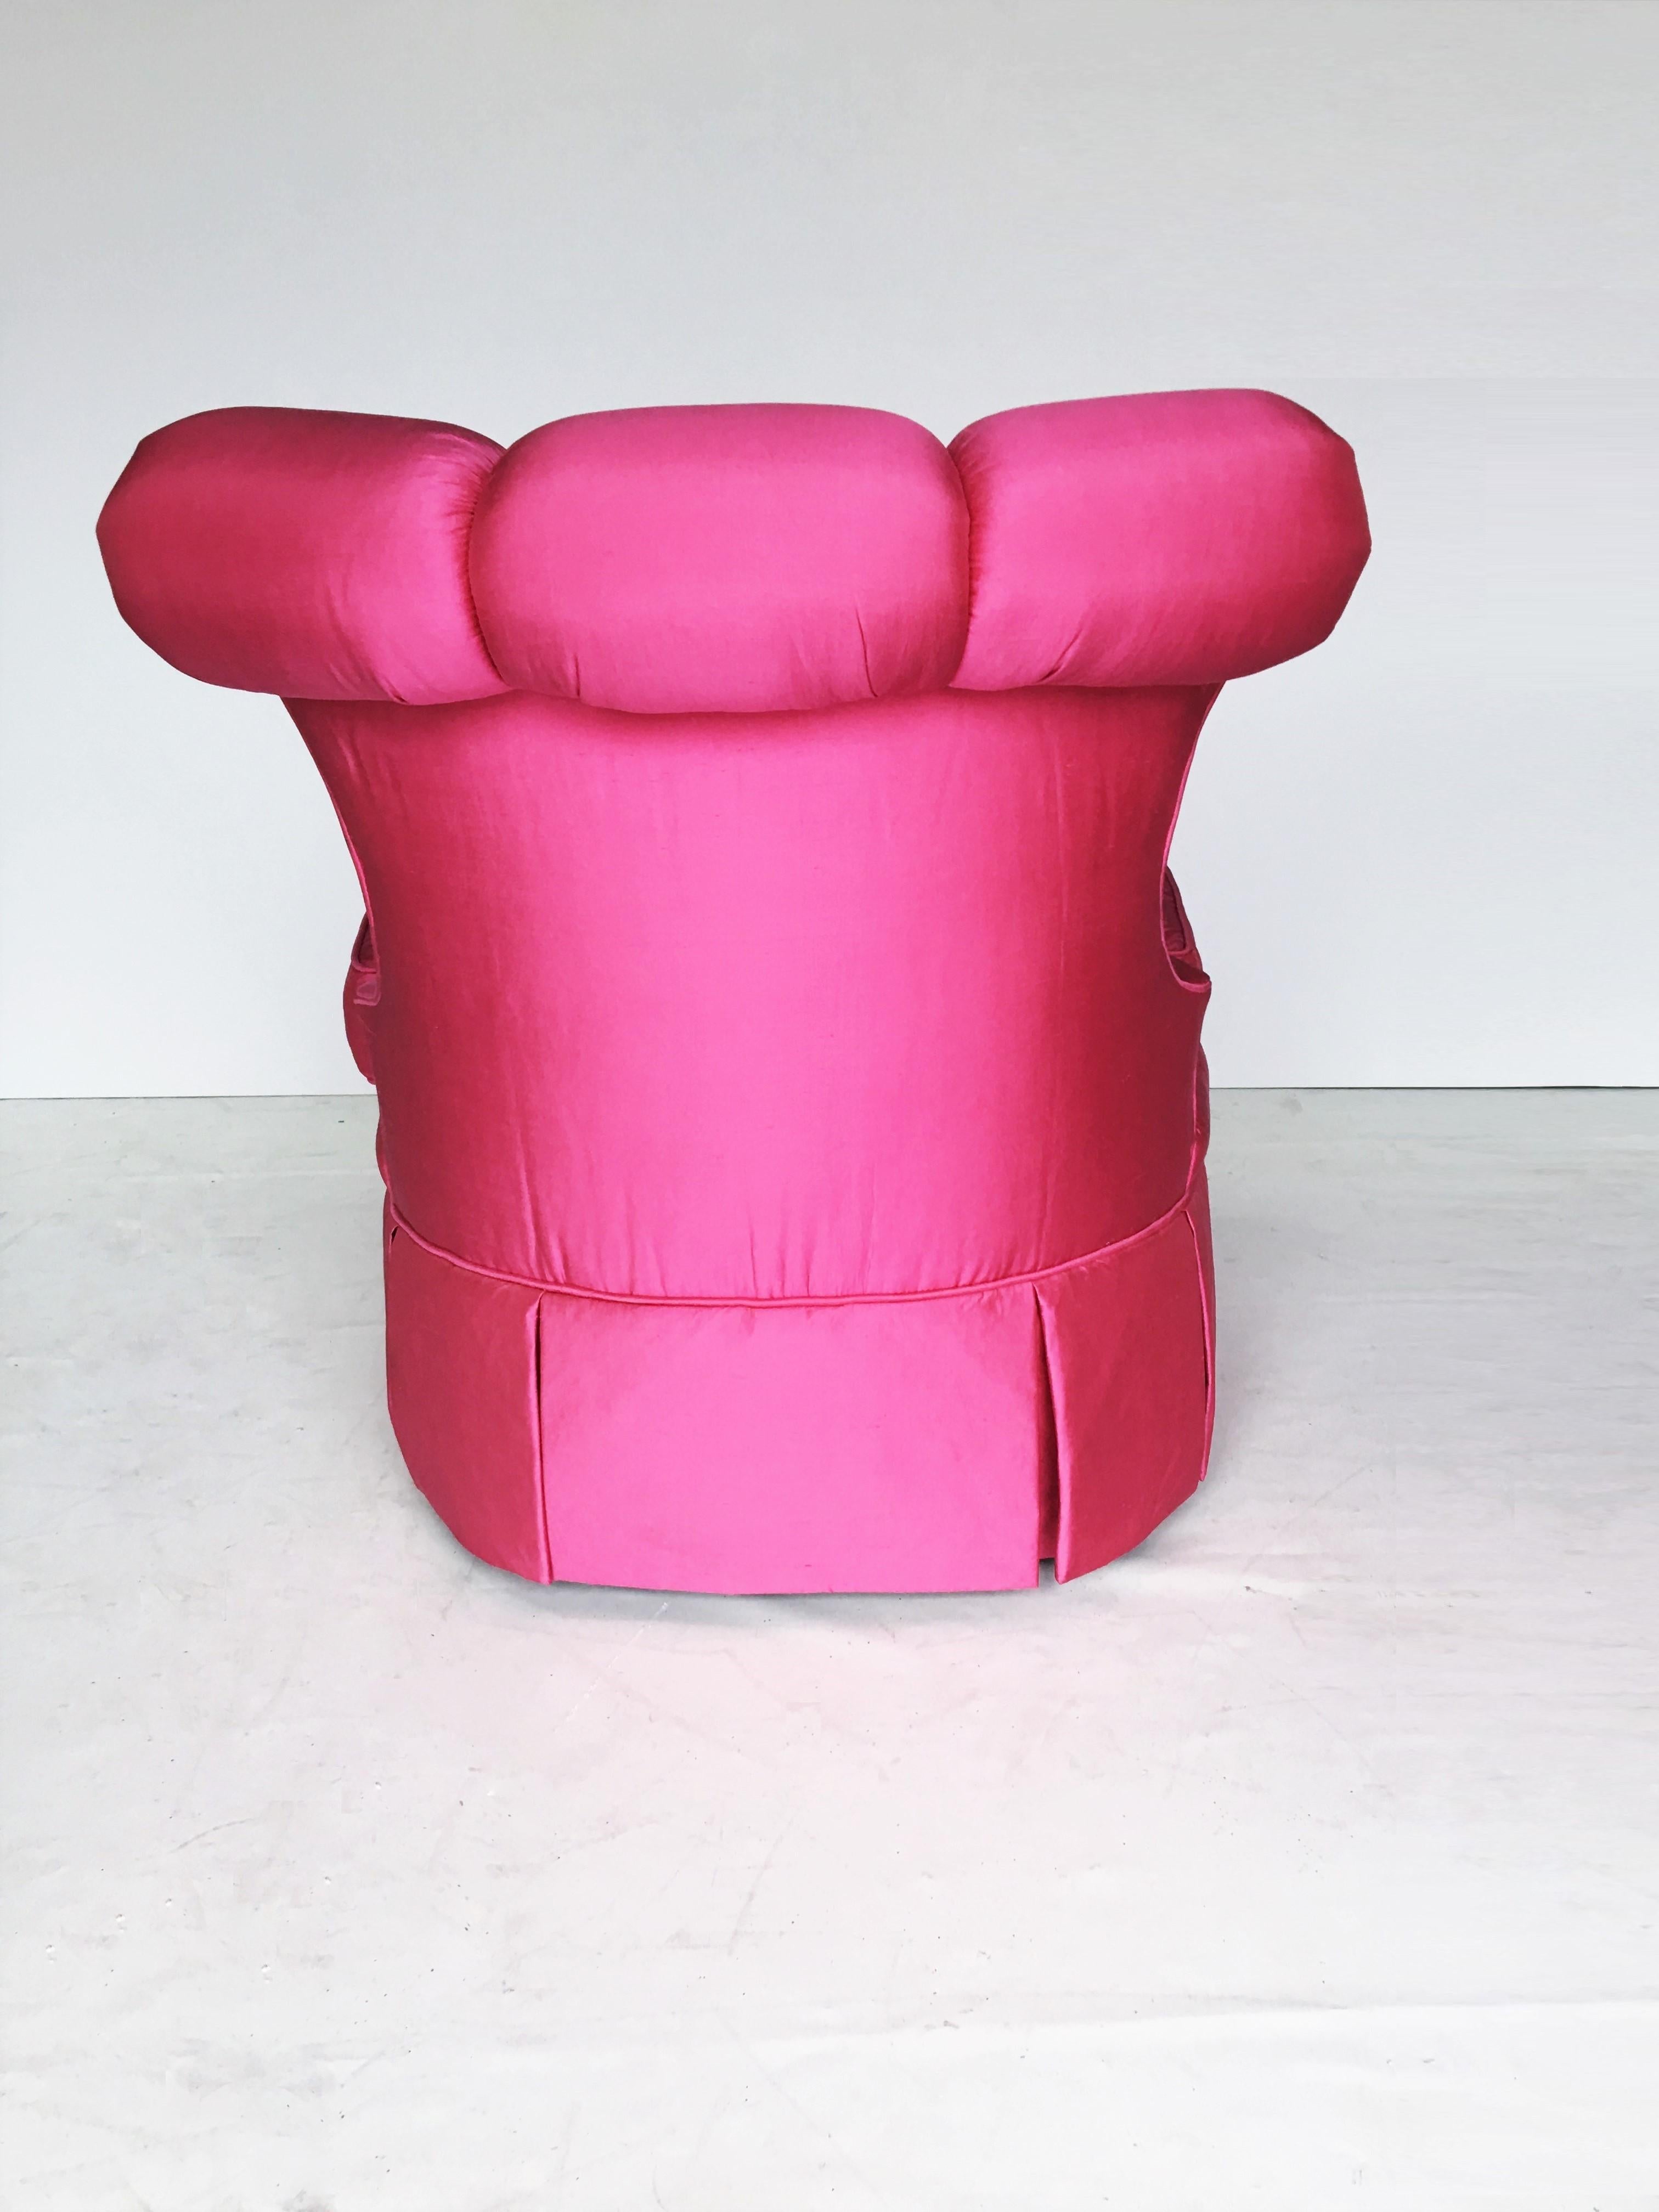 Elegant Pair of Slipper Chairs in Pink Silk For Sale 1